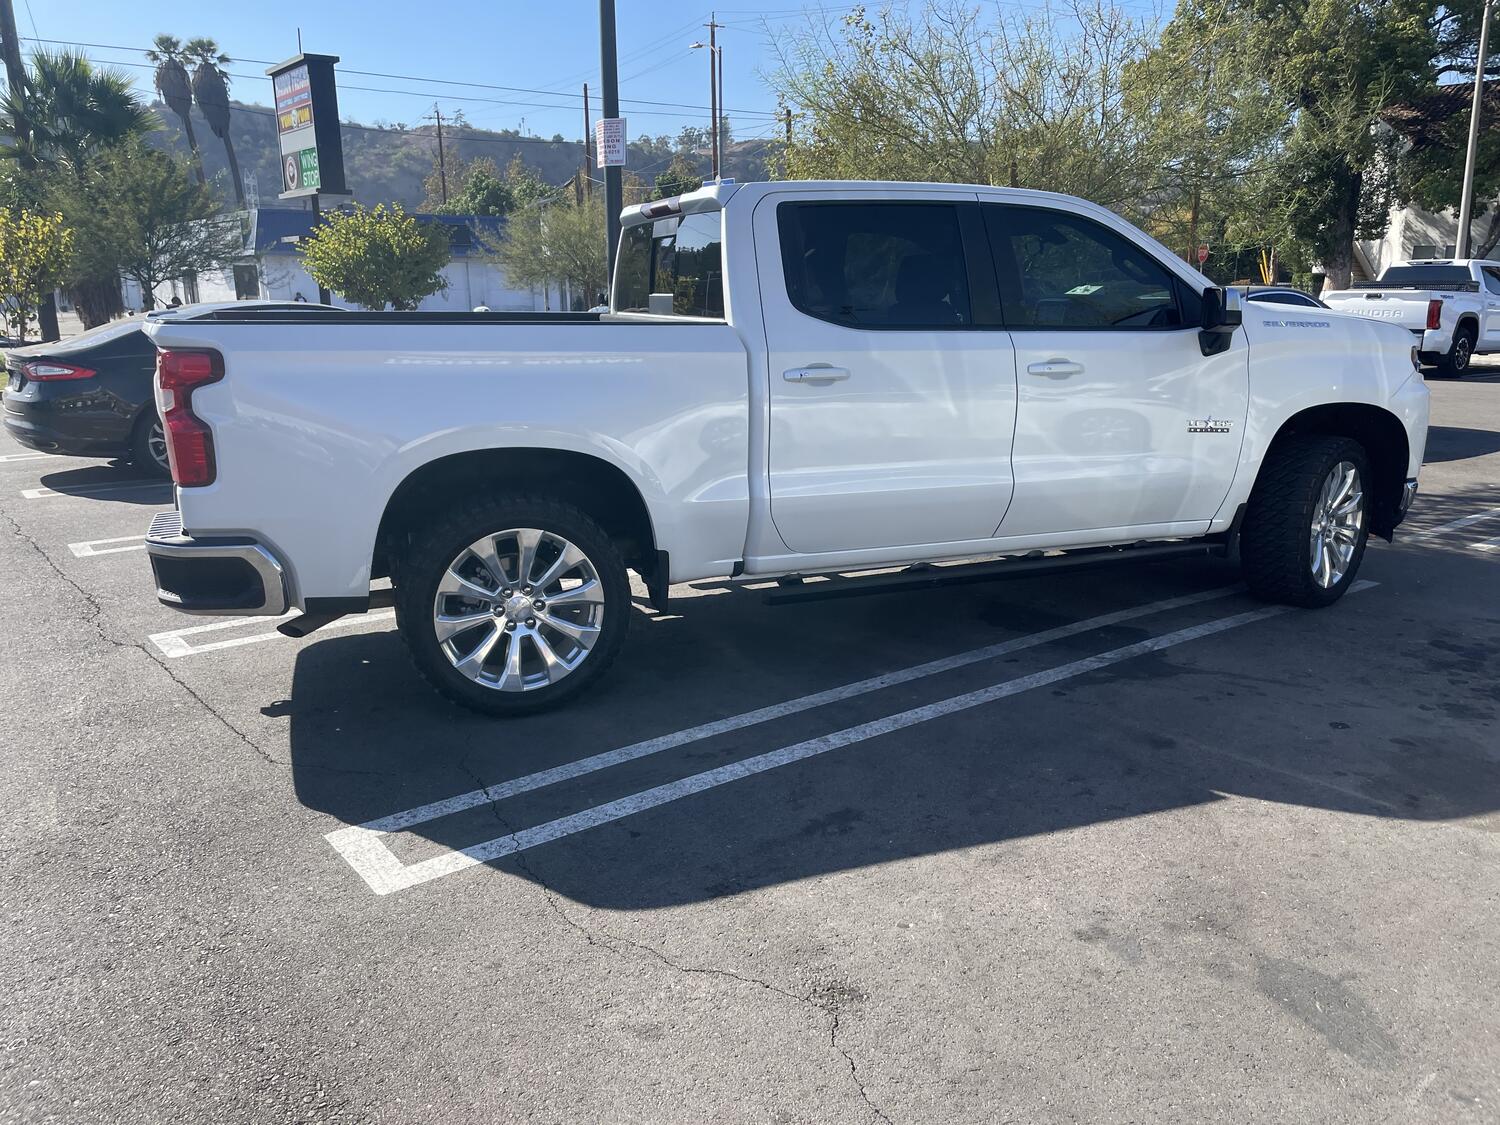 A huge white pickup truck parked diagonally across two spots in a parking lot